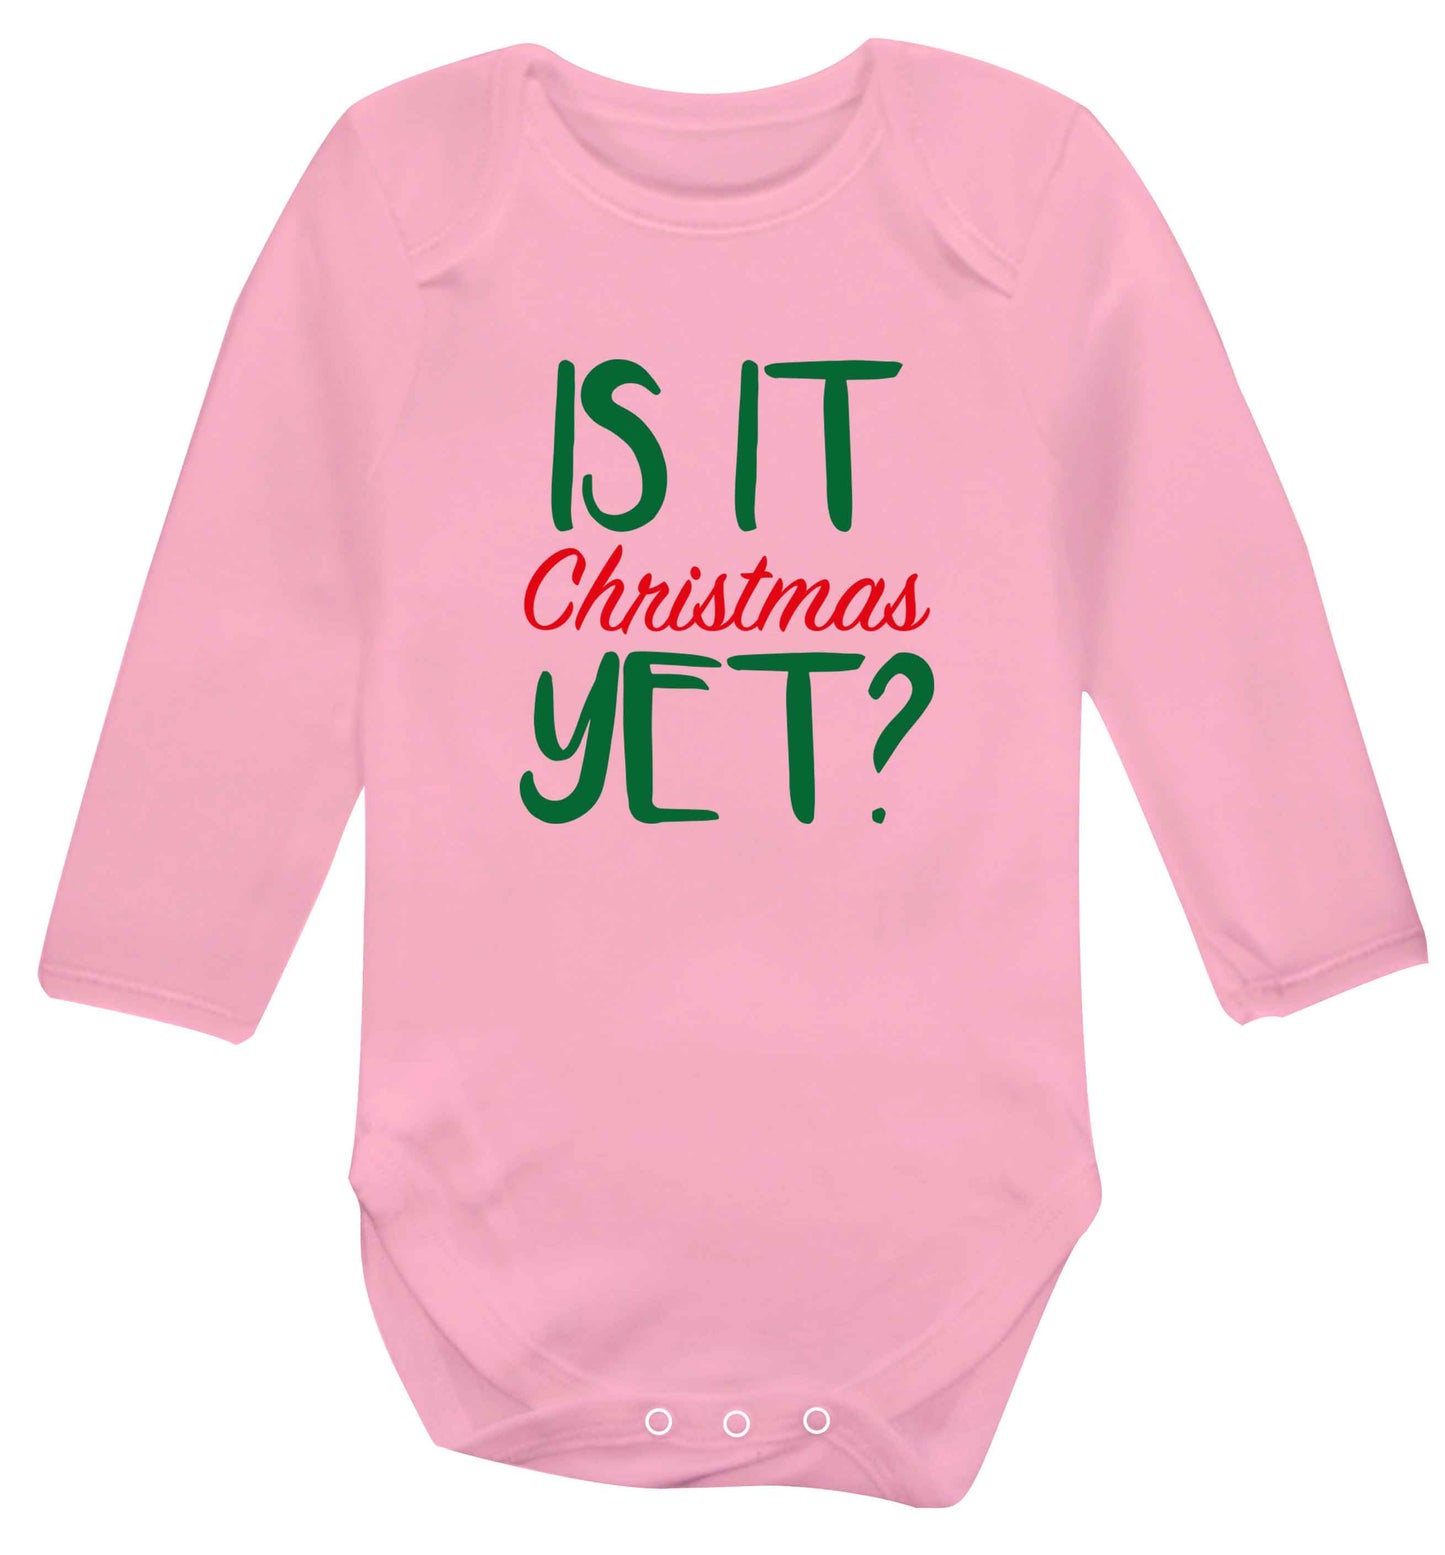 Is it Christmas yet? baby vest long sleeved pale pink 6-12 months